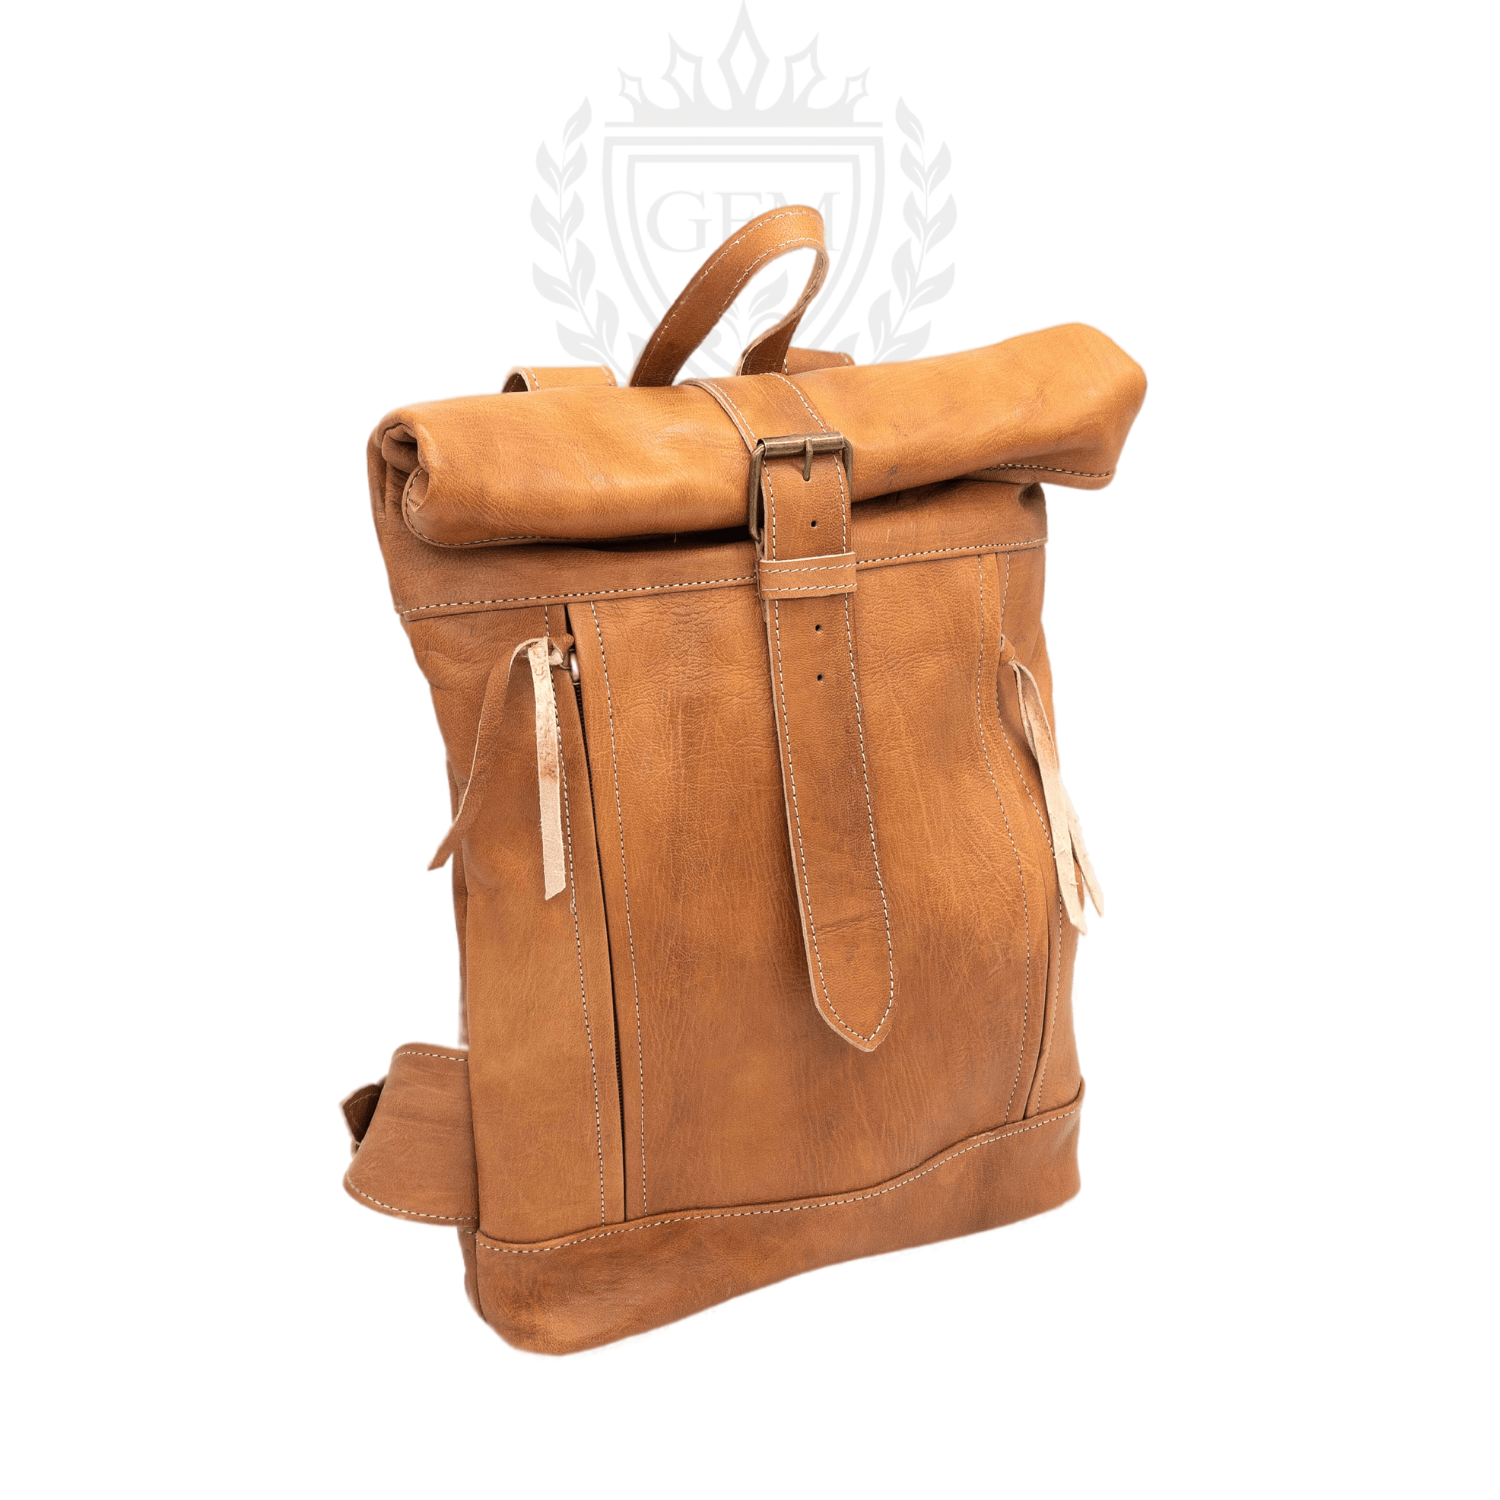 Moroccan Rolltop Backpack - Leather Travel Rucksack for Unisex